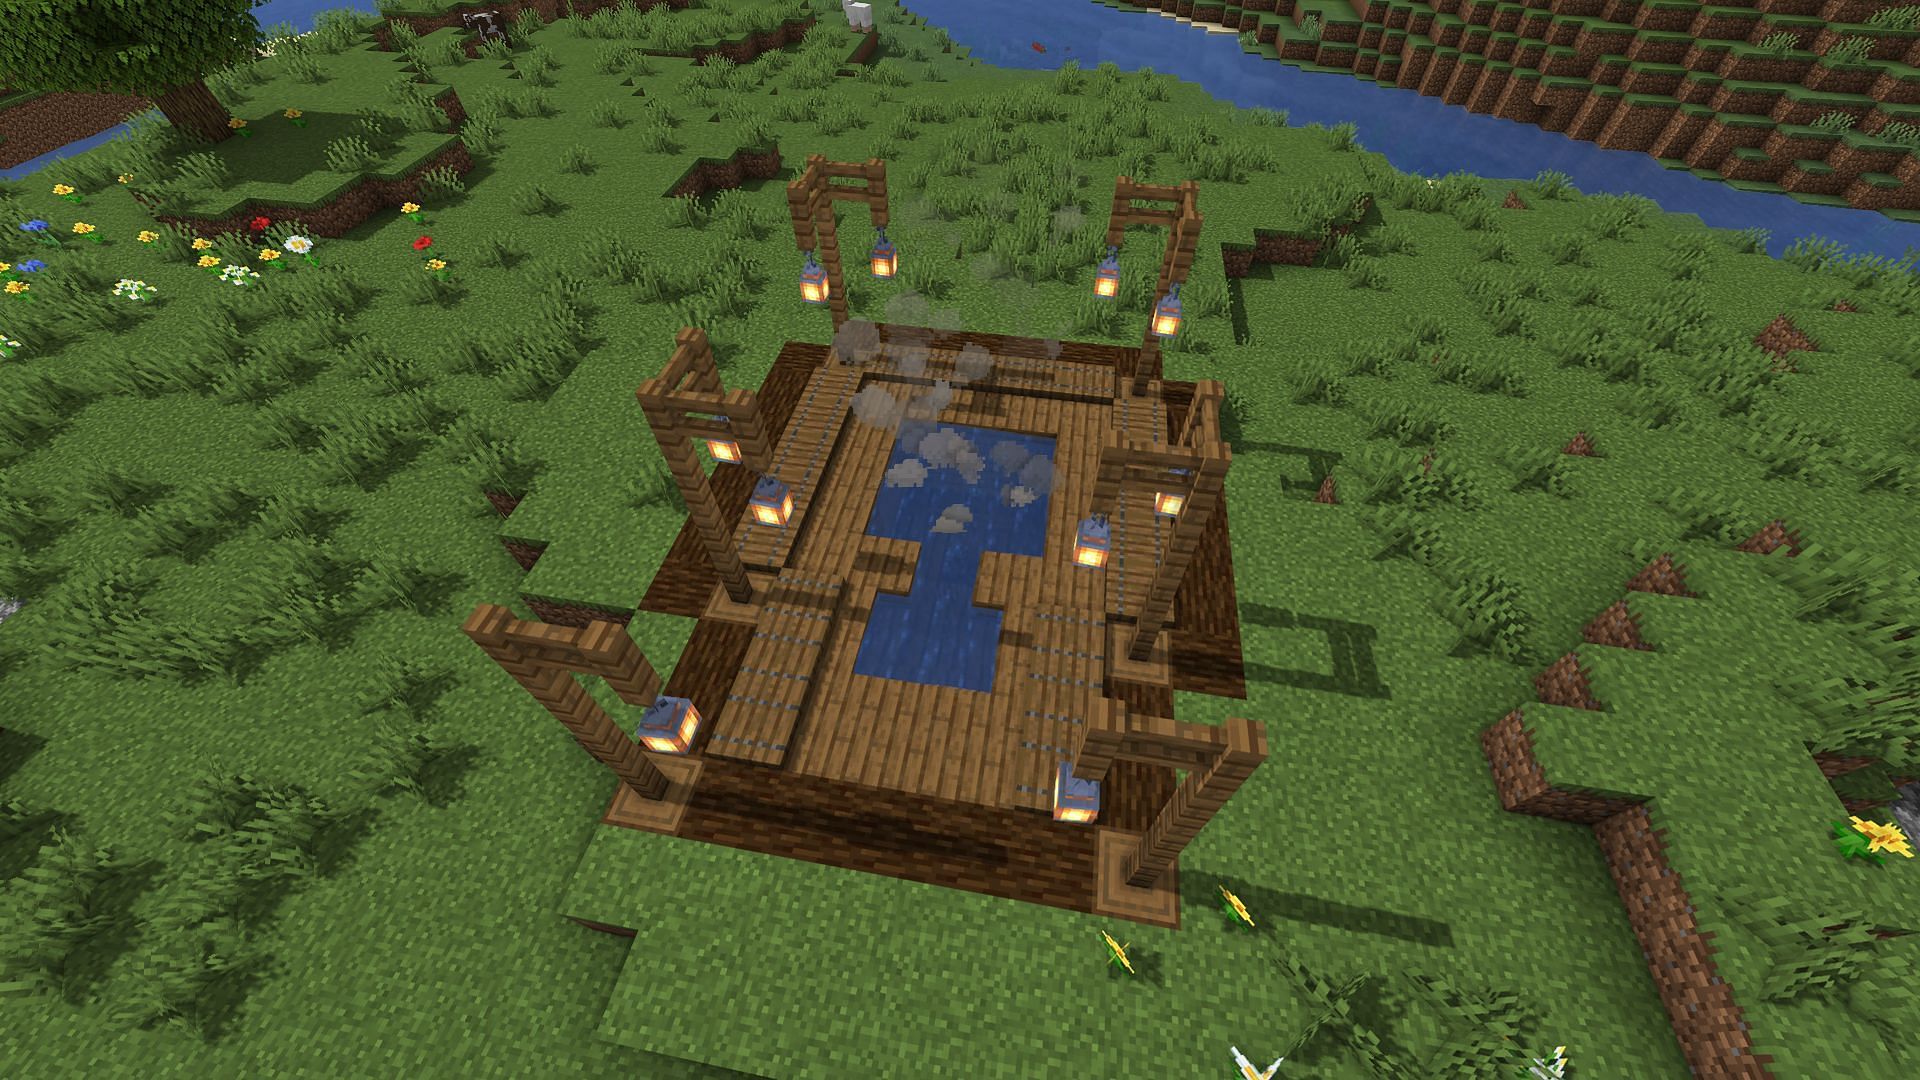 An example of an in-ground rustic hot tub (Image via Minecraft)